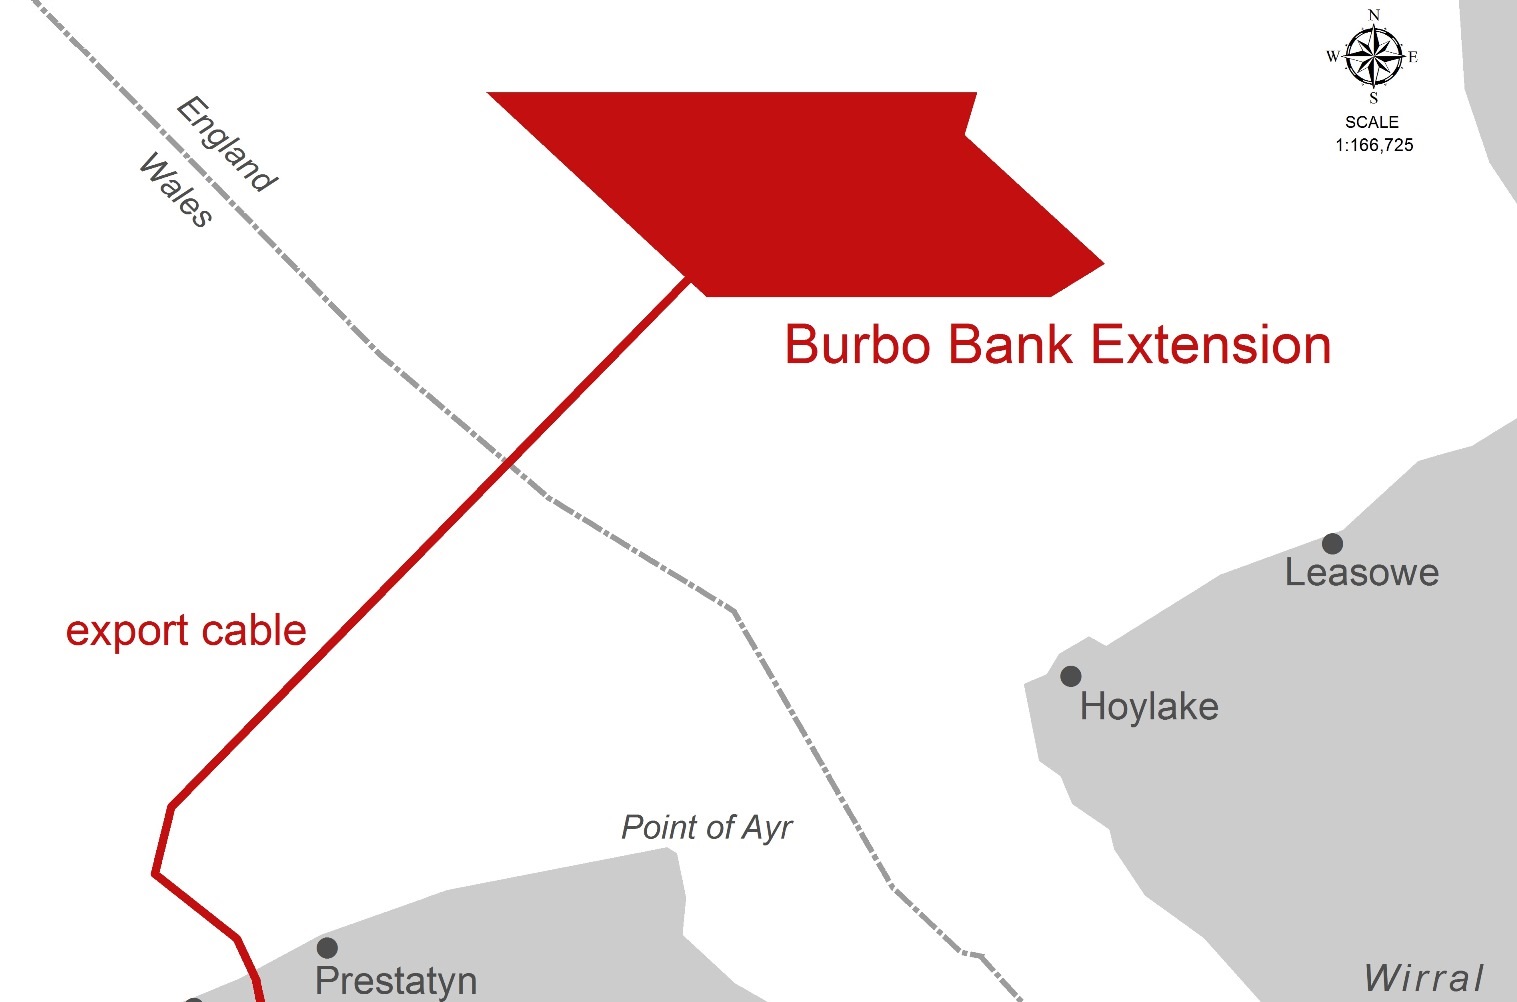 Dong Energy to Organize Two 'Meet the Buyer' Events for Burbo Bank Extension